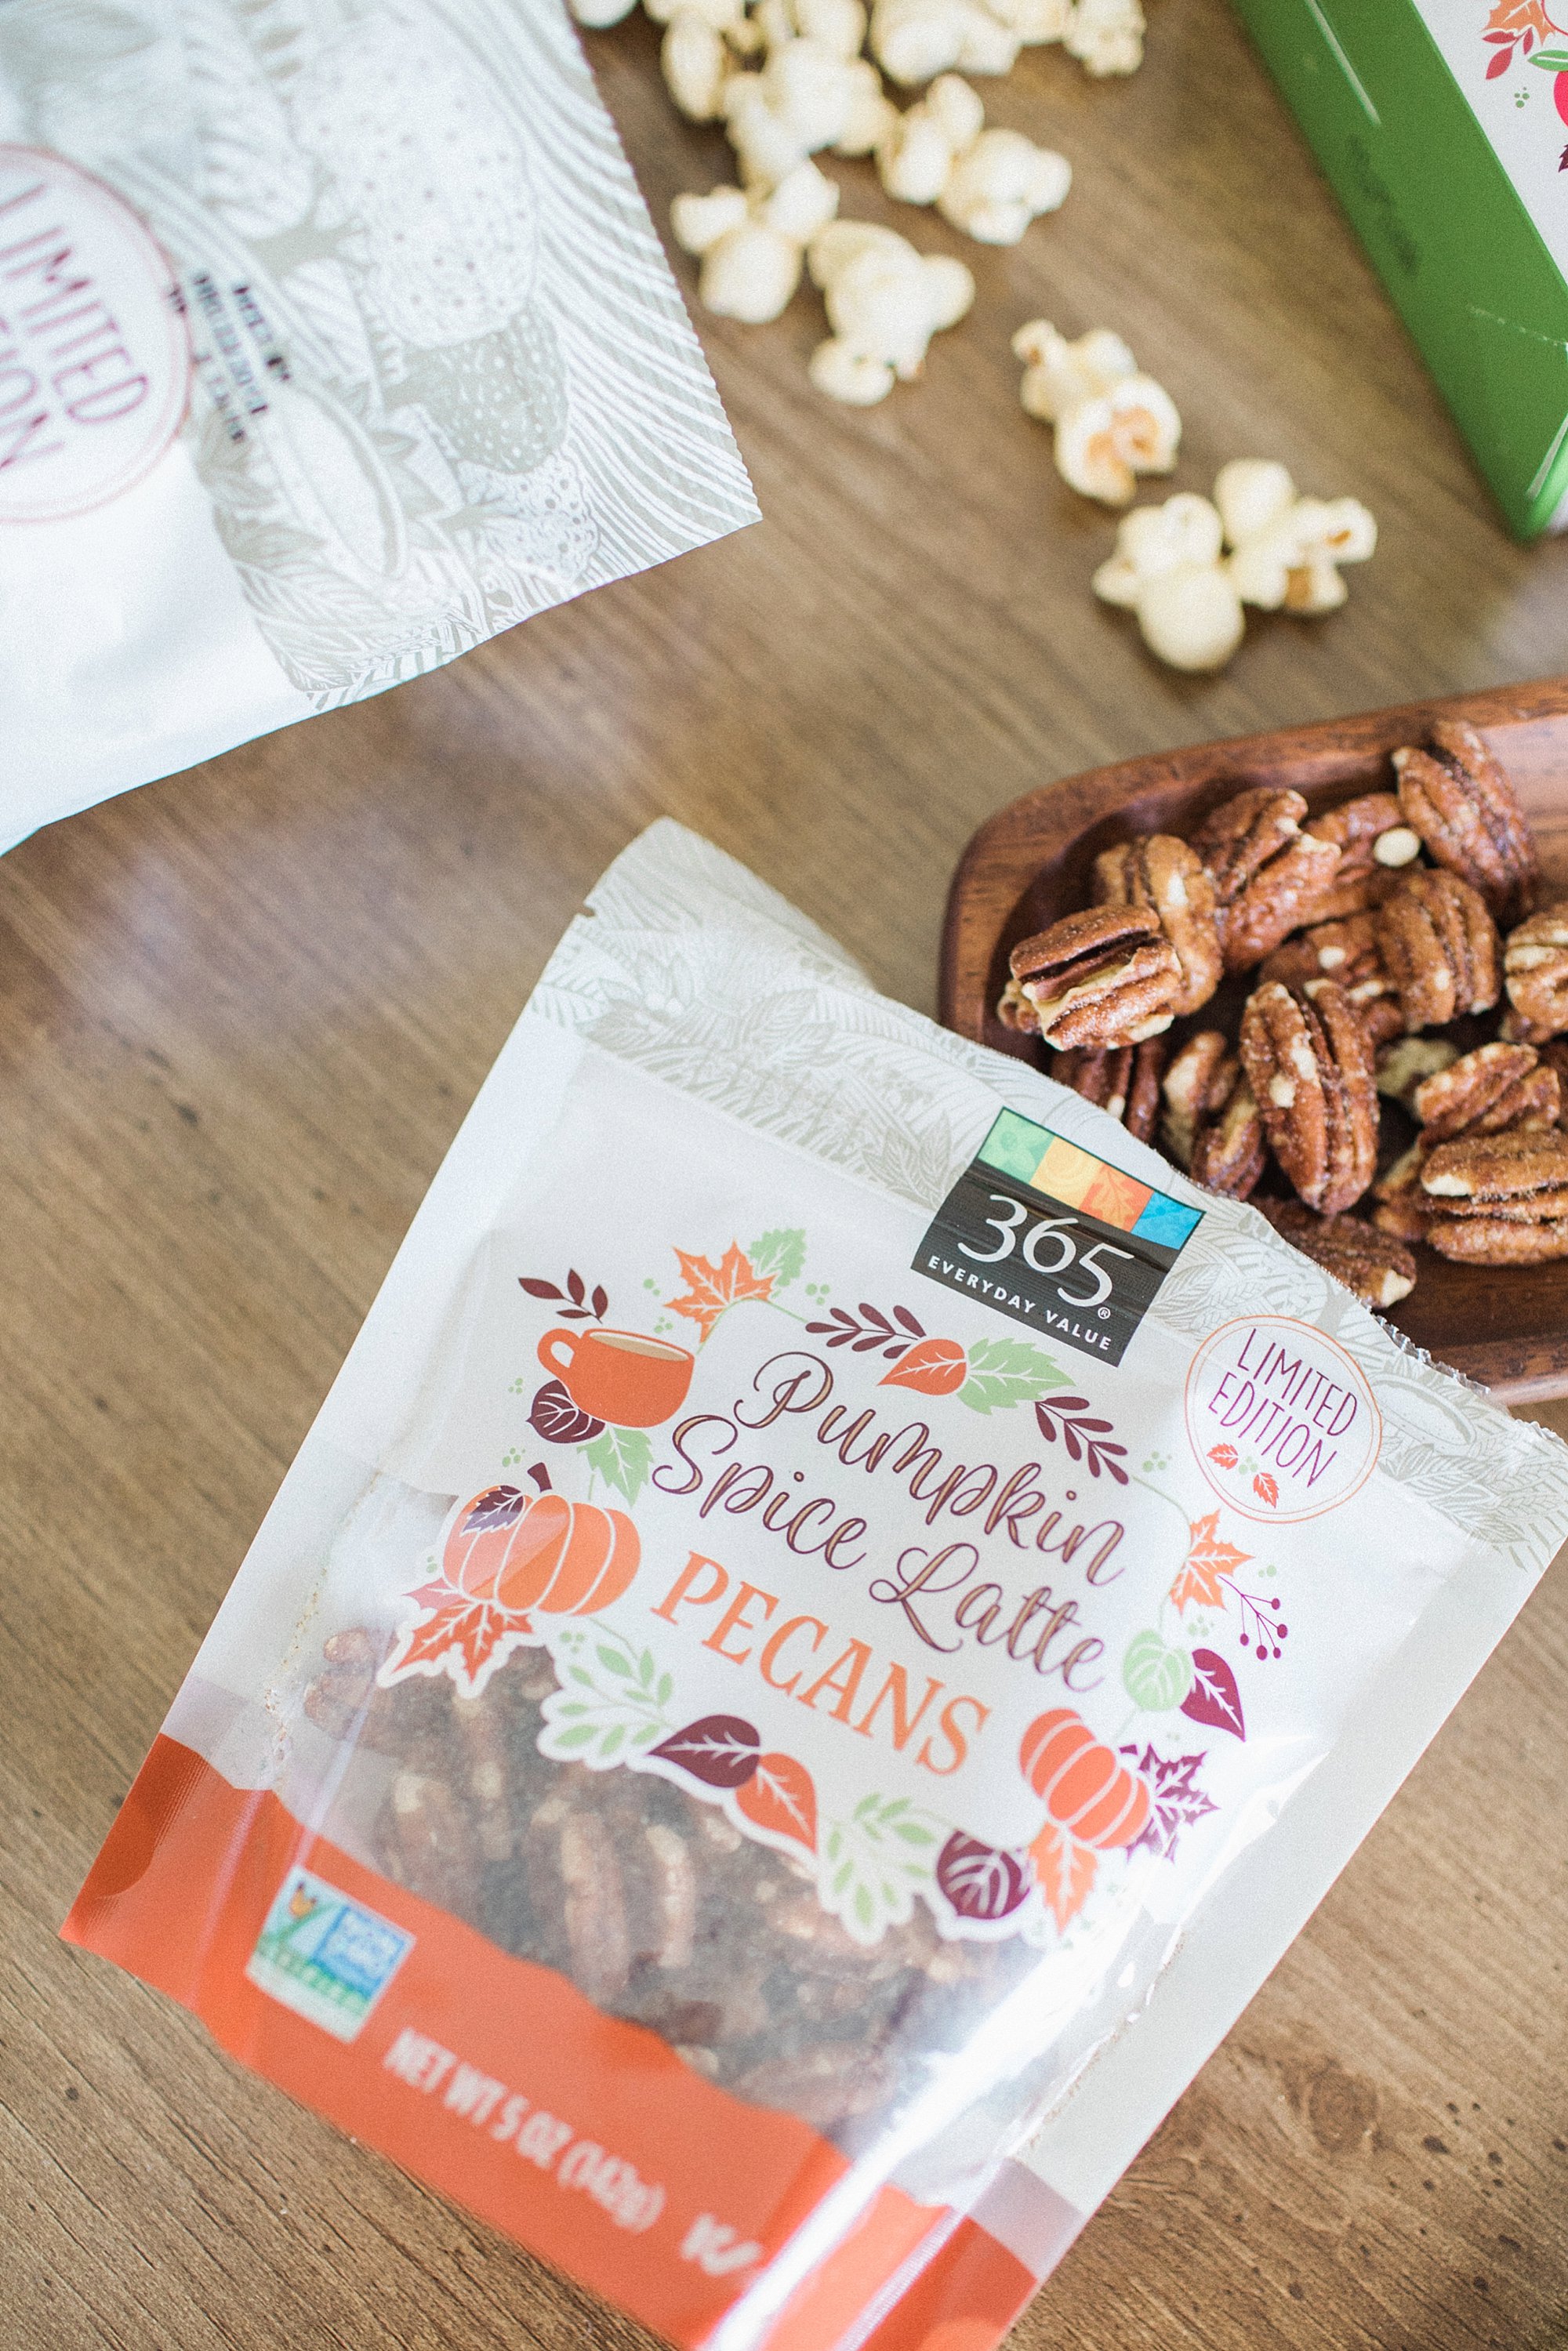 pumpkin spice latte pecans from whole foods